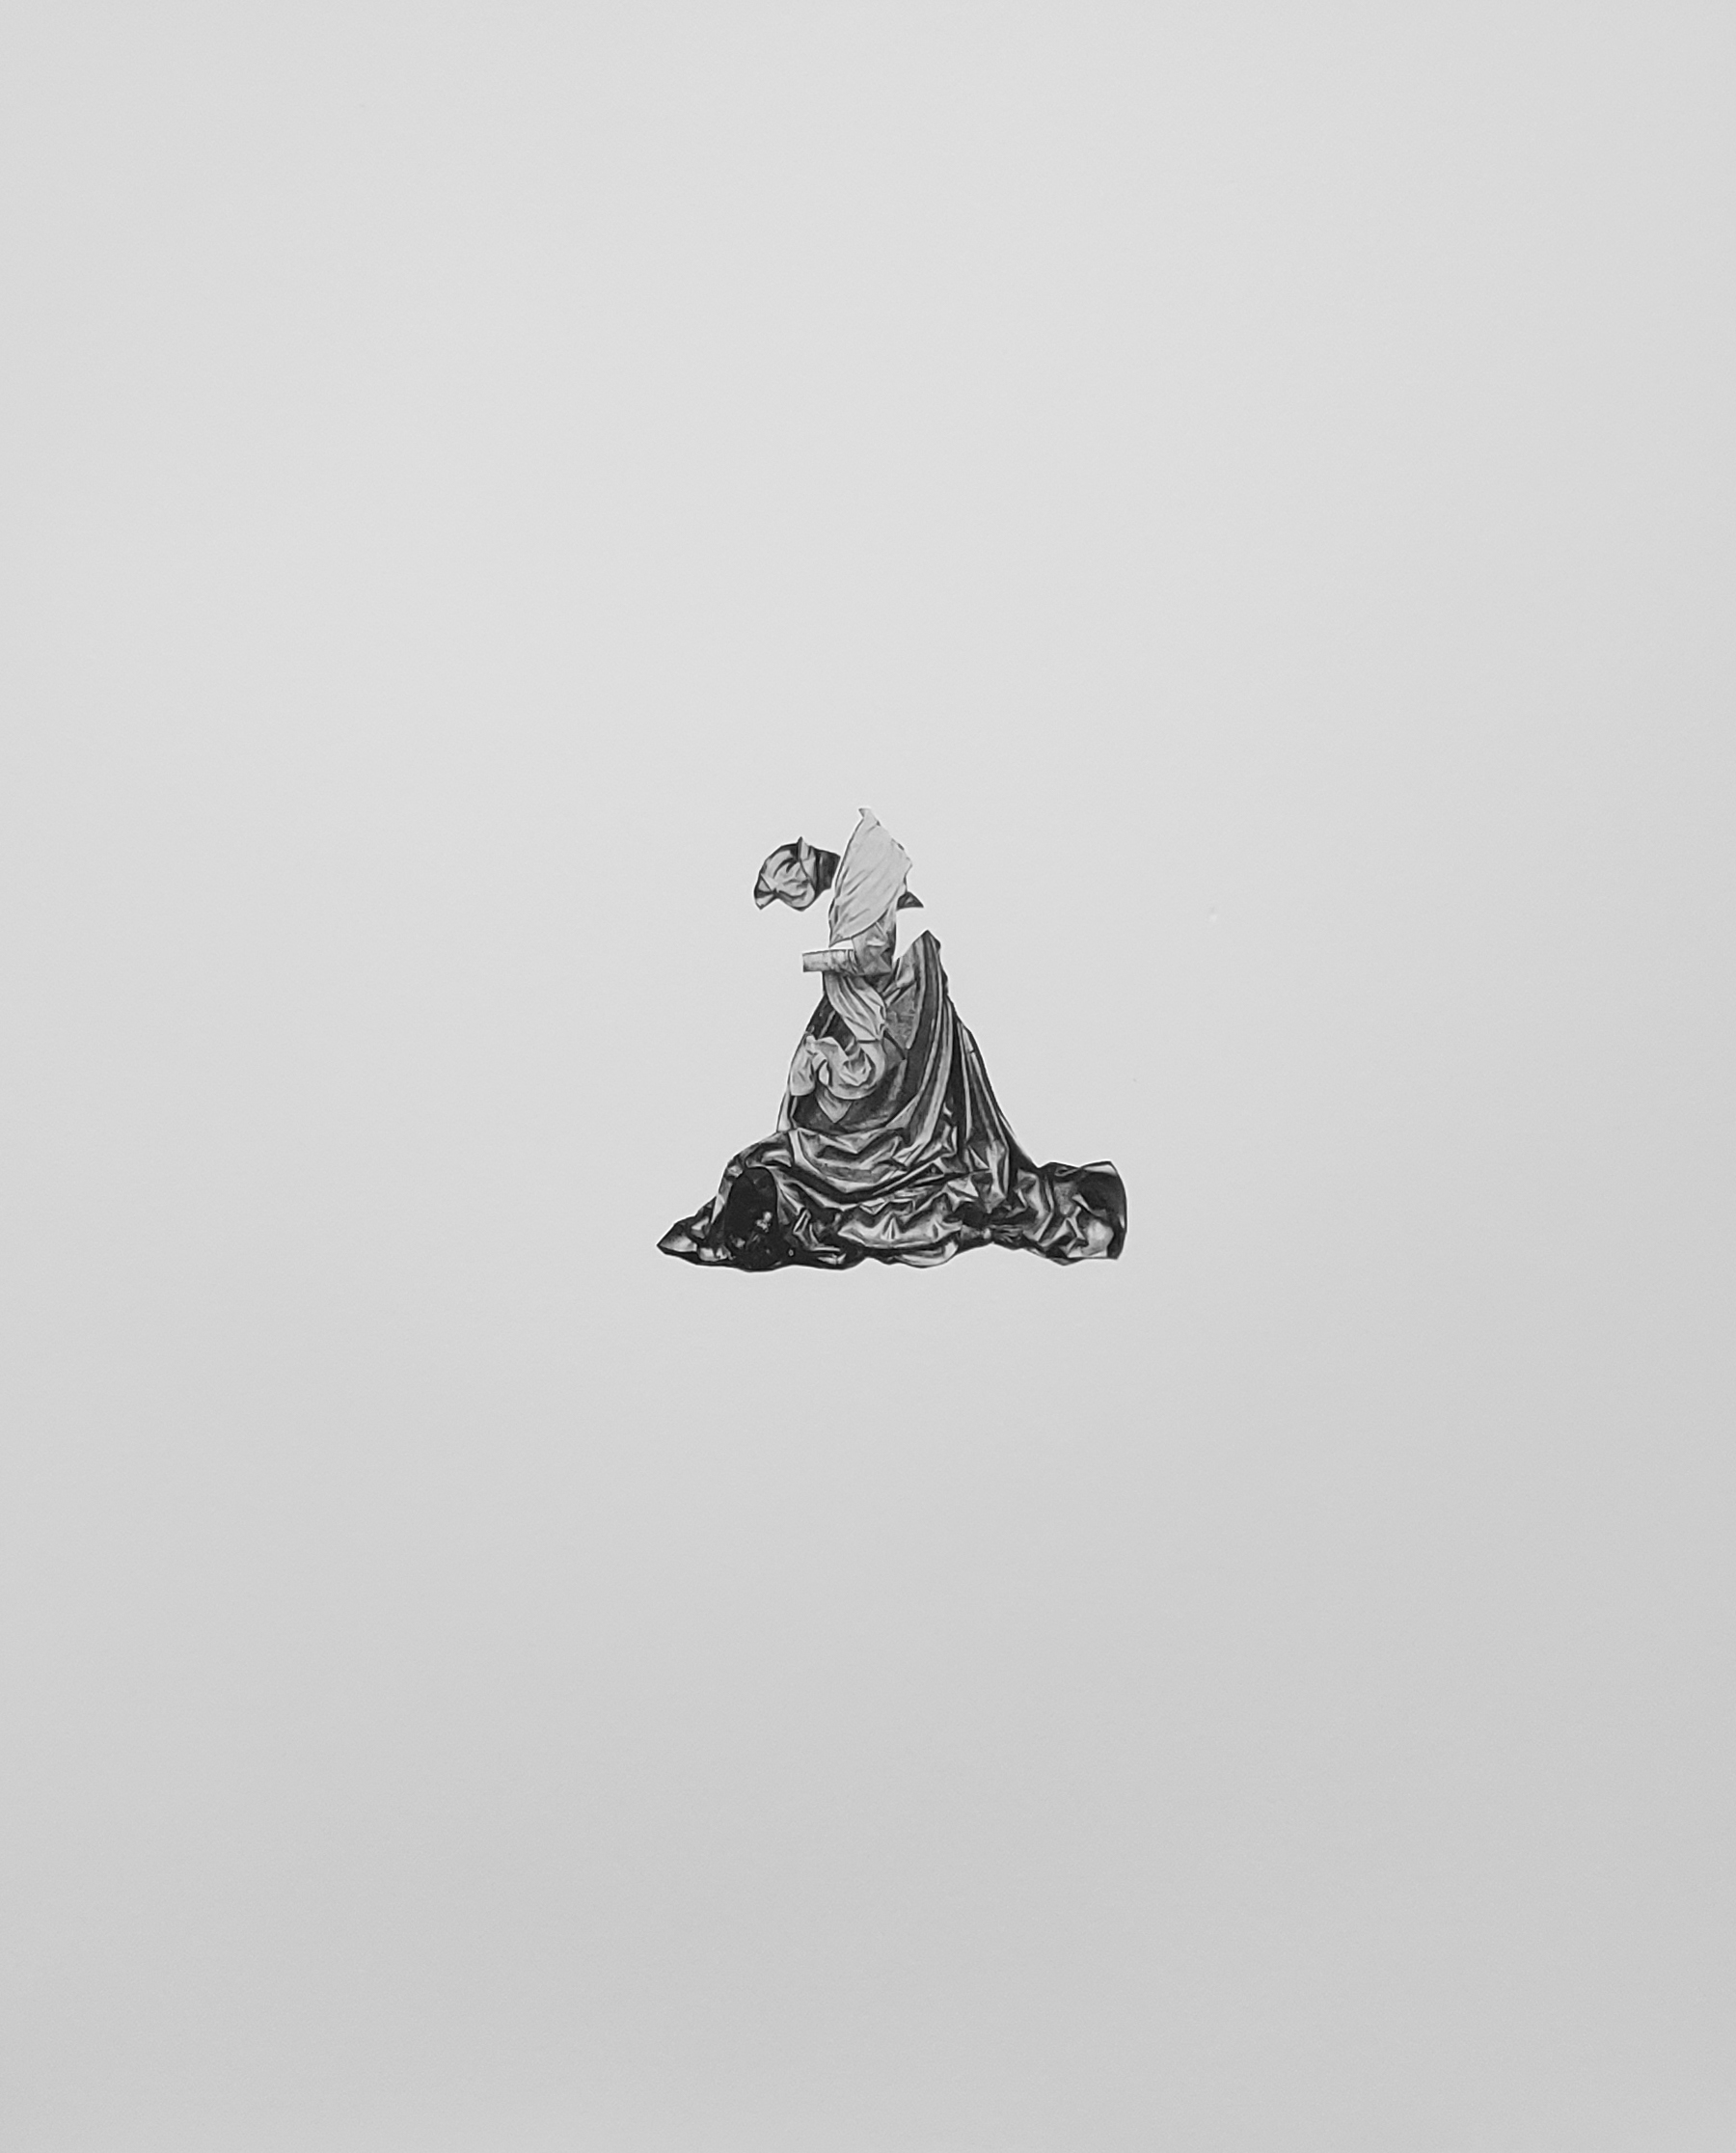 A greyscale image of a robed woman without face or hands against a light grey background